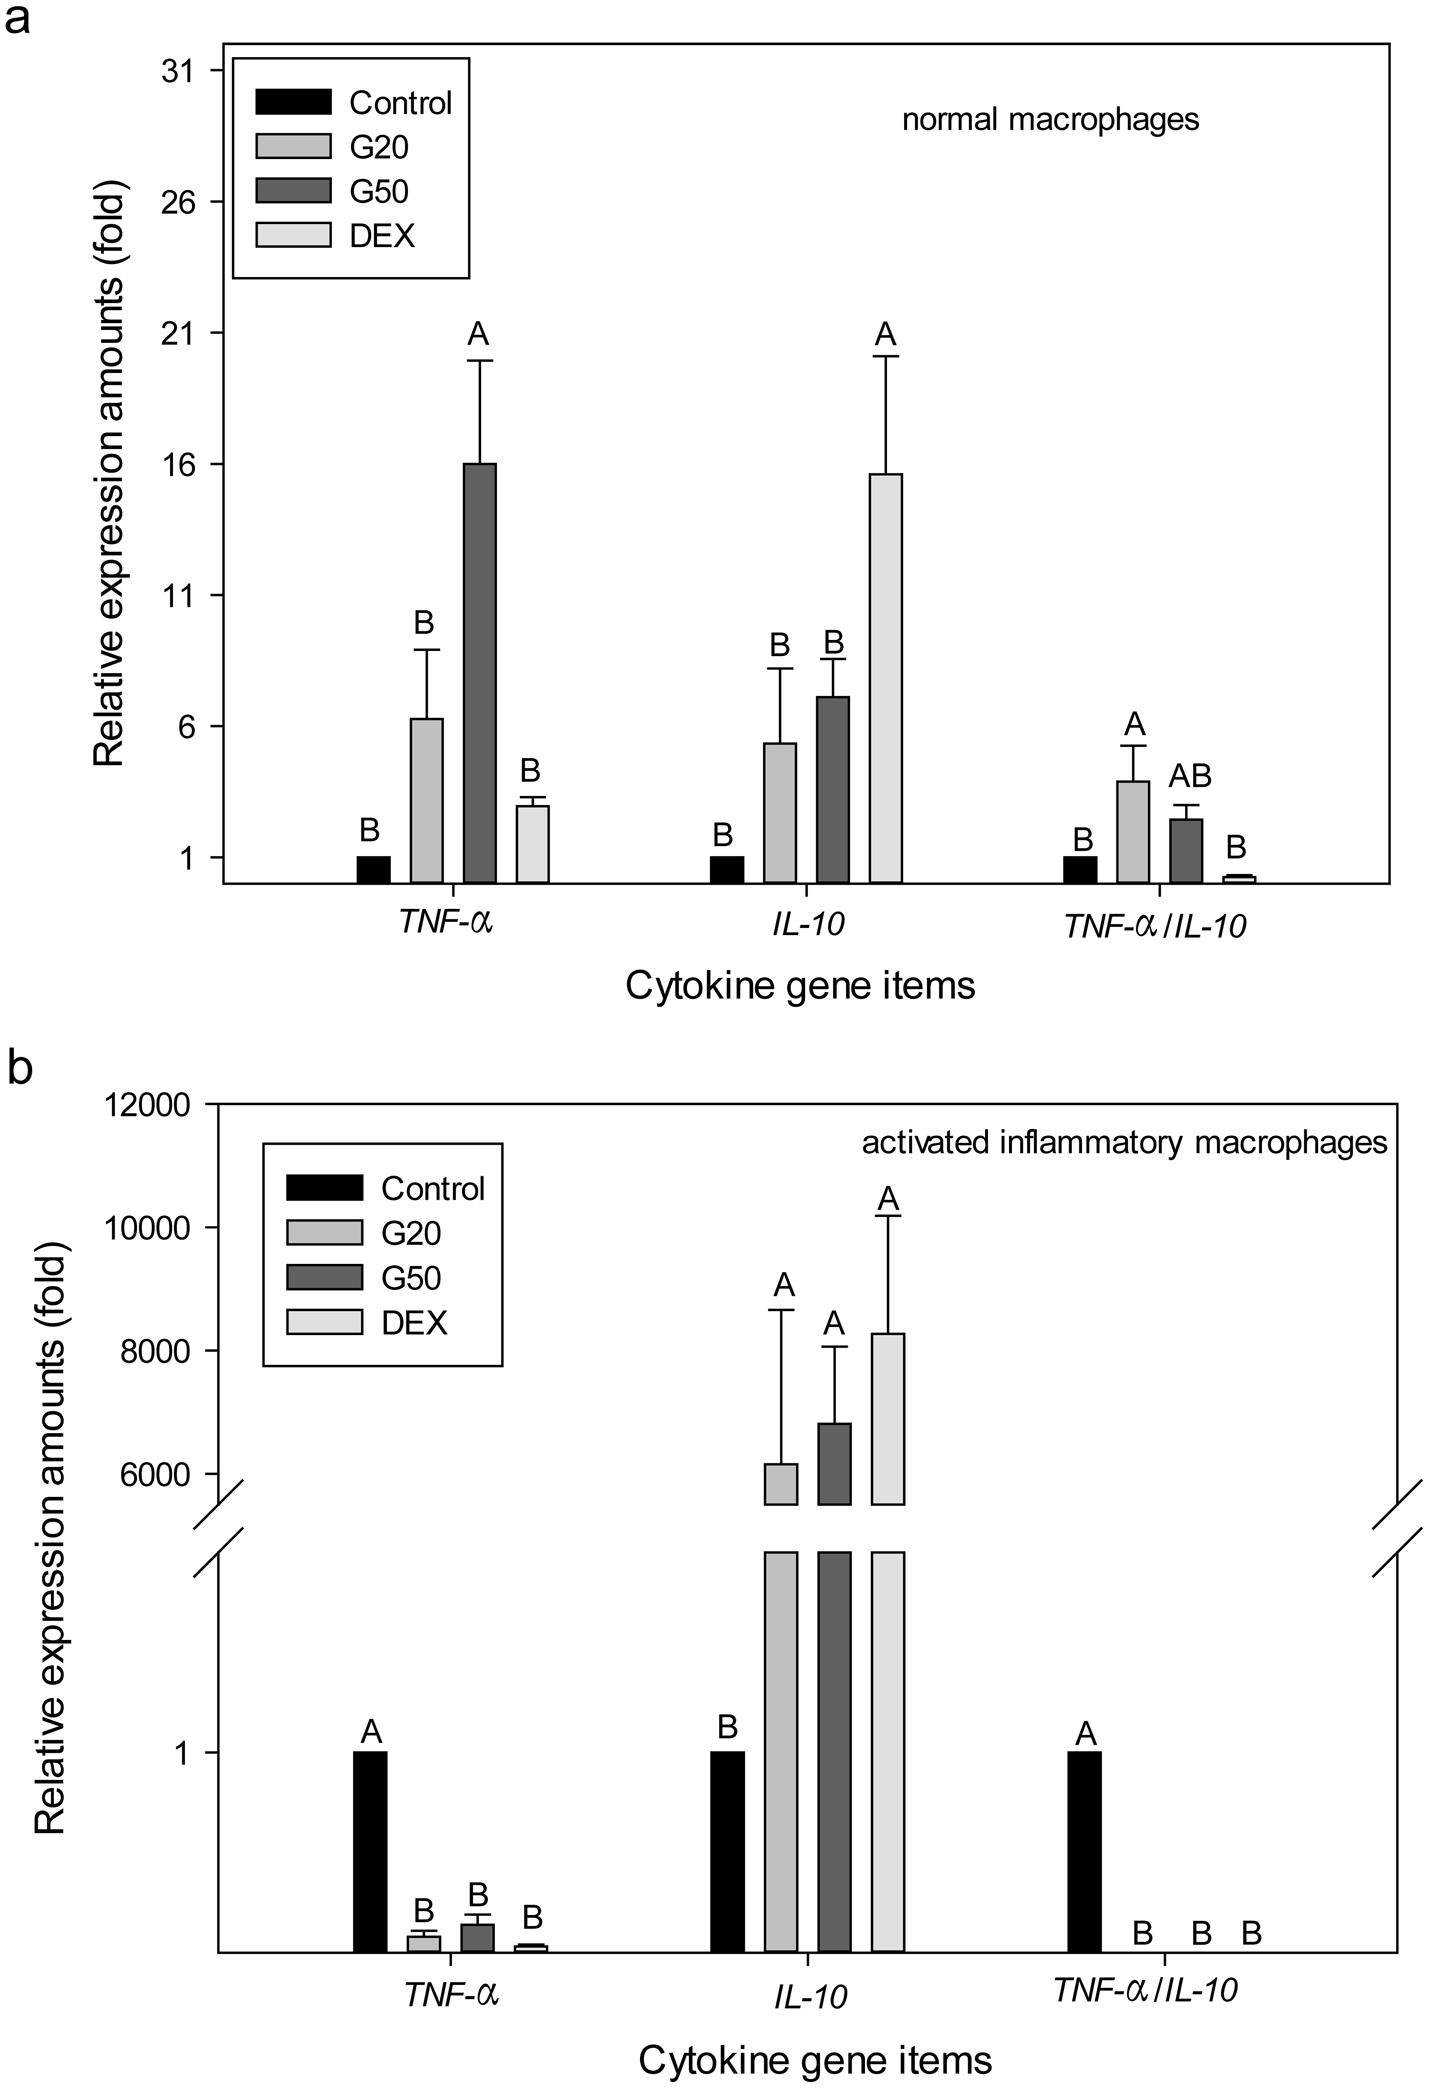 Effects of quercetin-3-glucuronide (Q3G) administration on cytokine gene expression in normal (a) and activated inflammatory macrophages (b) from female BALB/c mice intraperitoneally injected with phosphate-buffered saline or lipopolysaccharide at 8 mg/kg BW through 12 h.